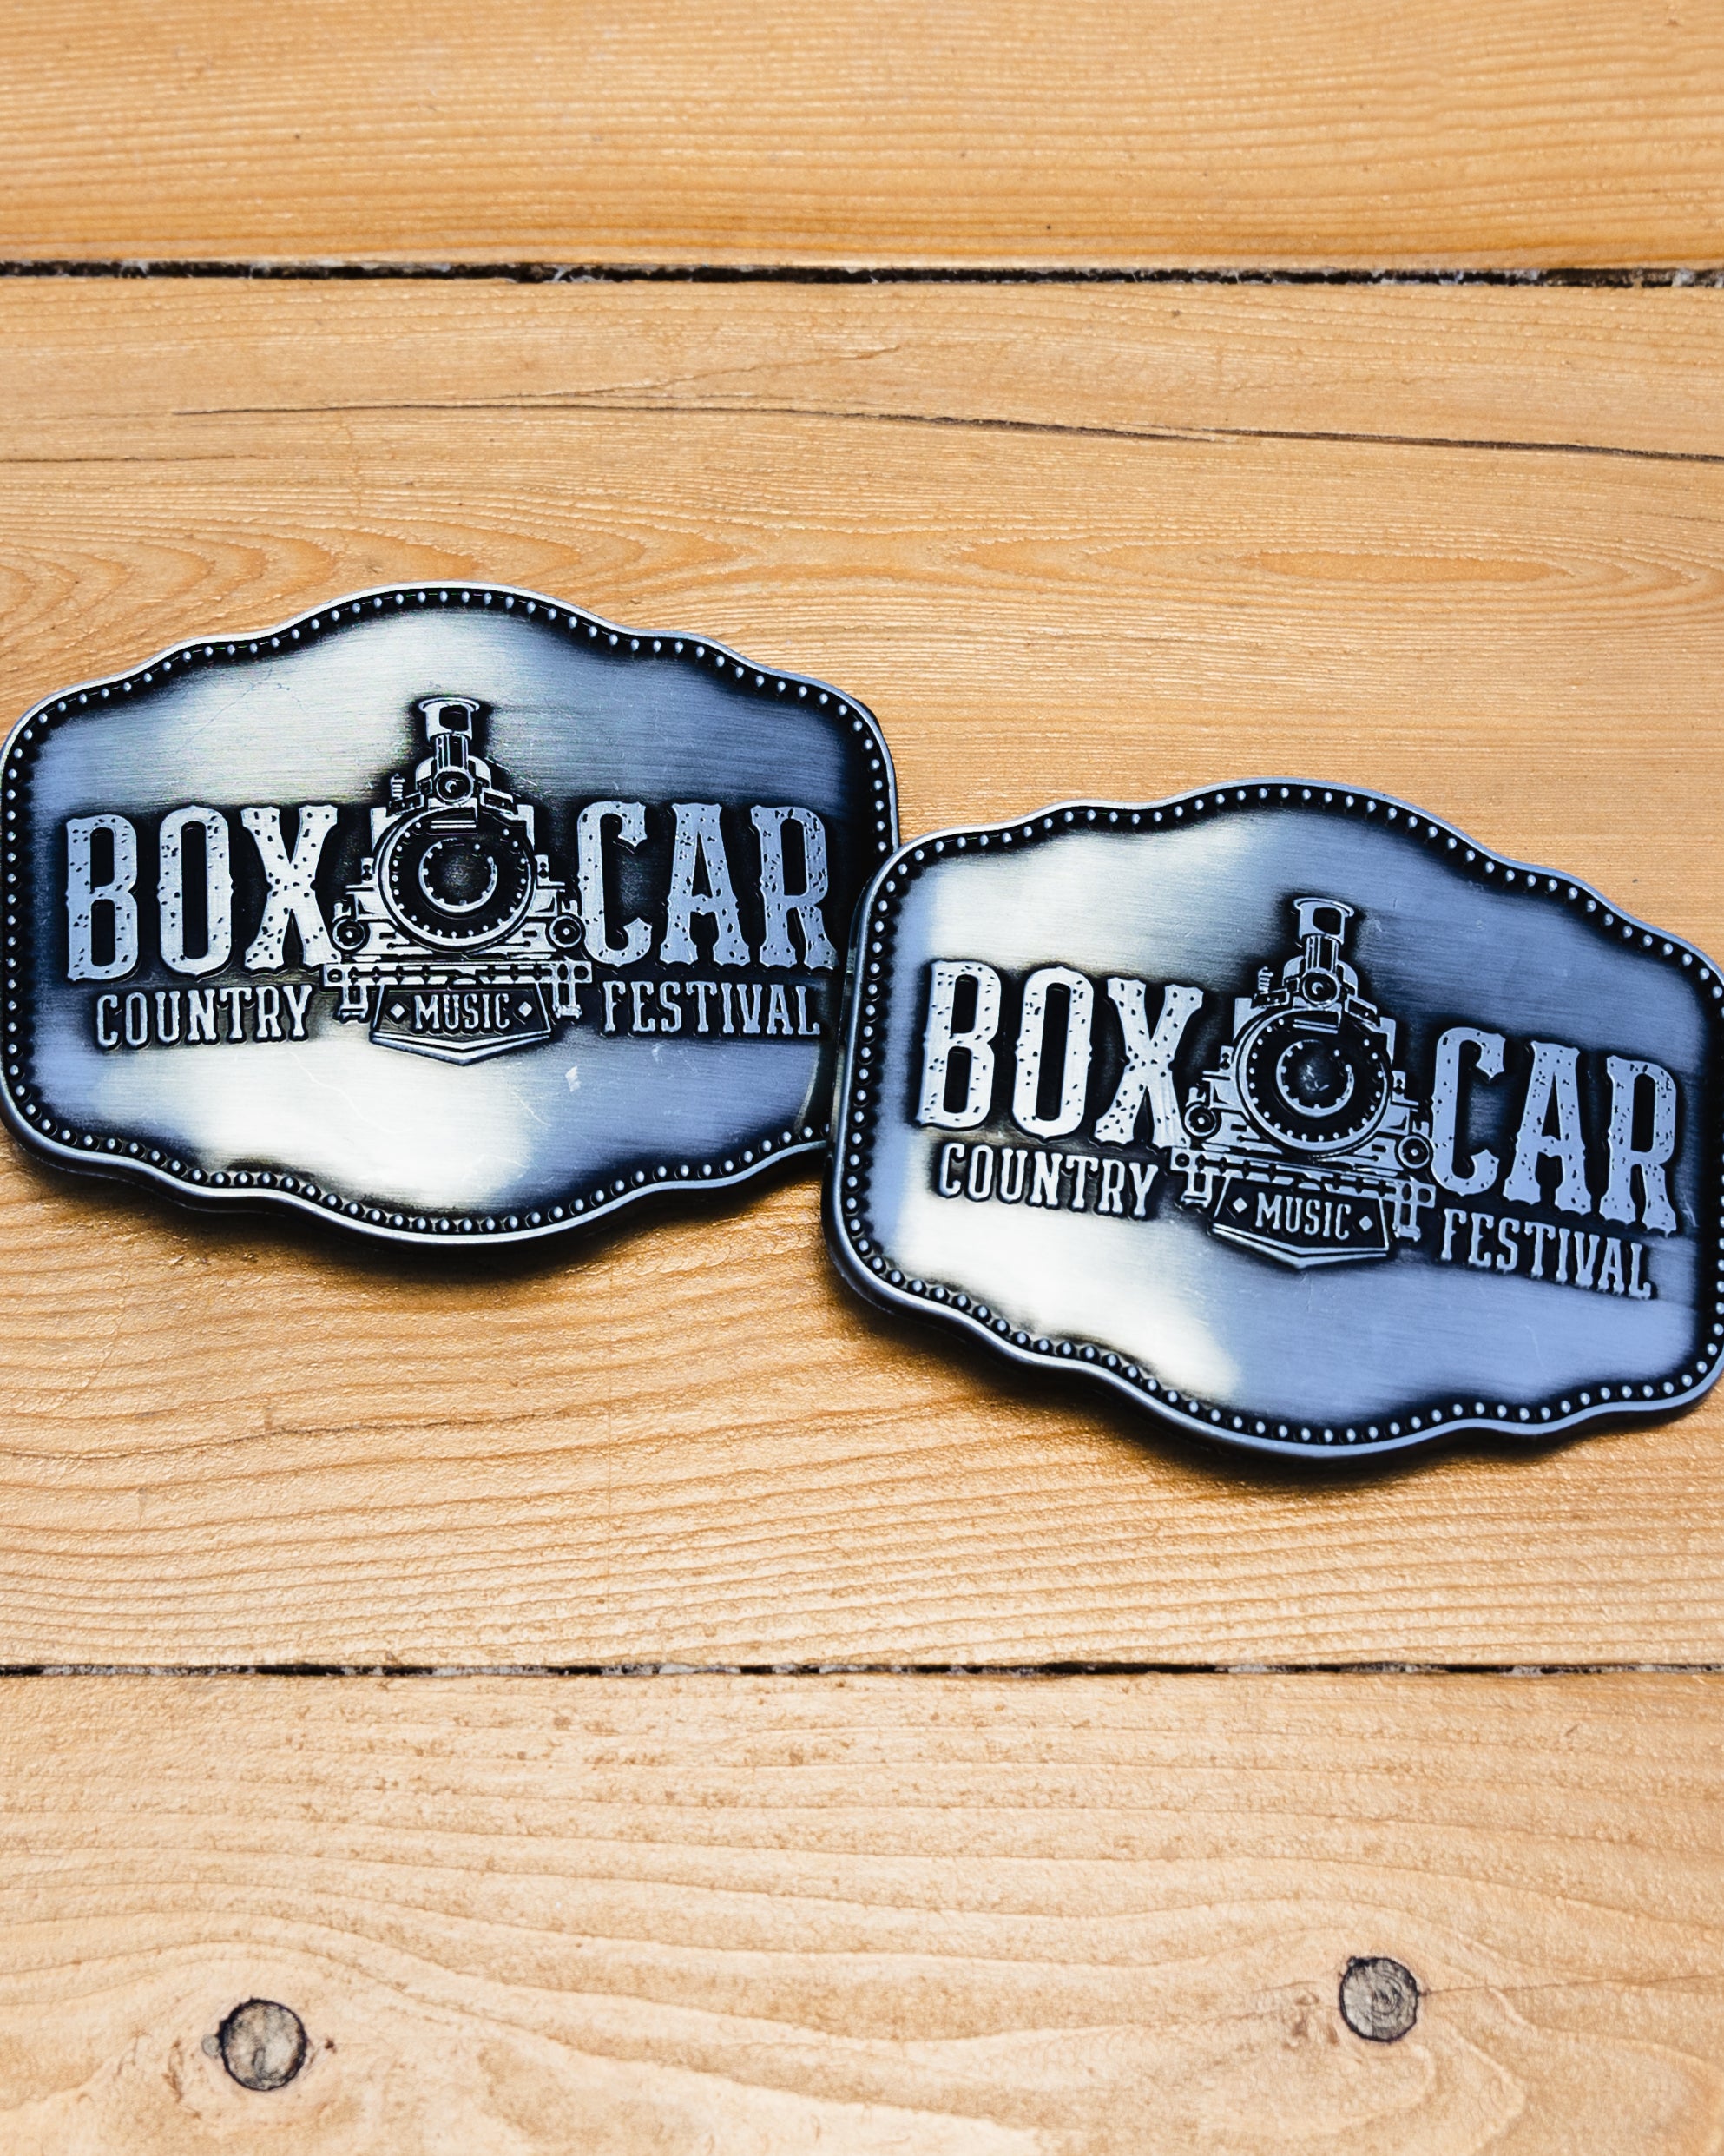 Silver belt buckle with the Boxcar Country Music Festival train logo.